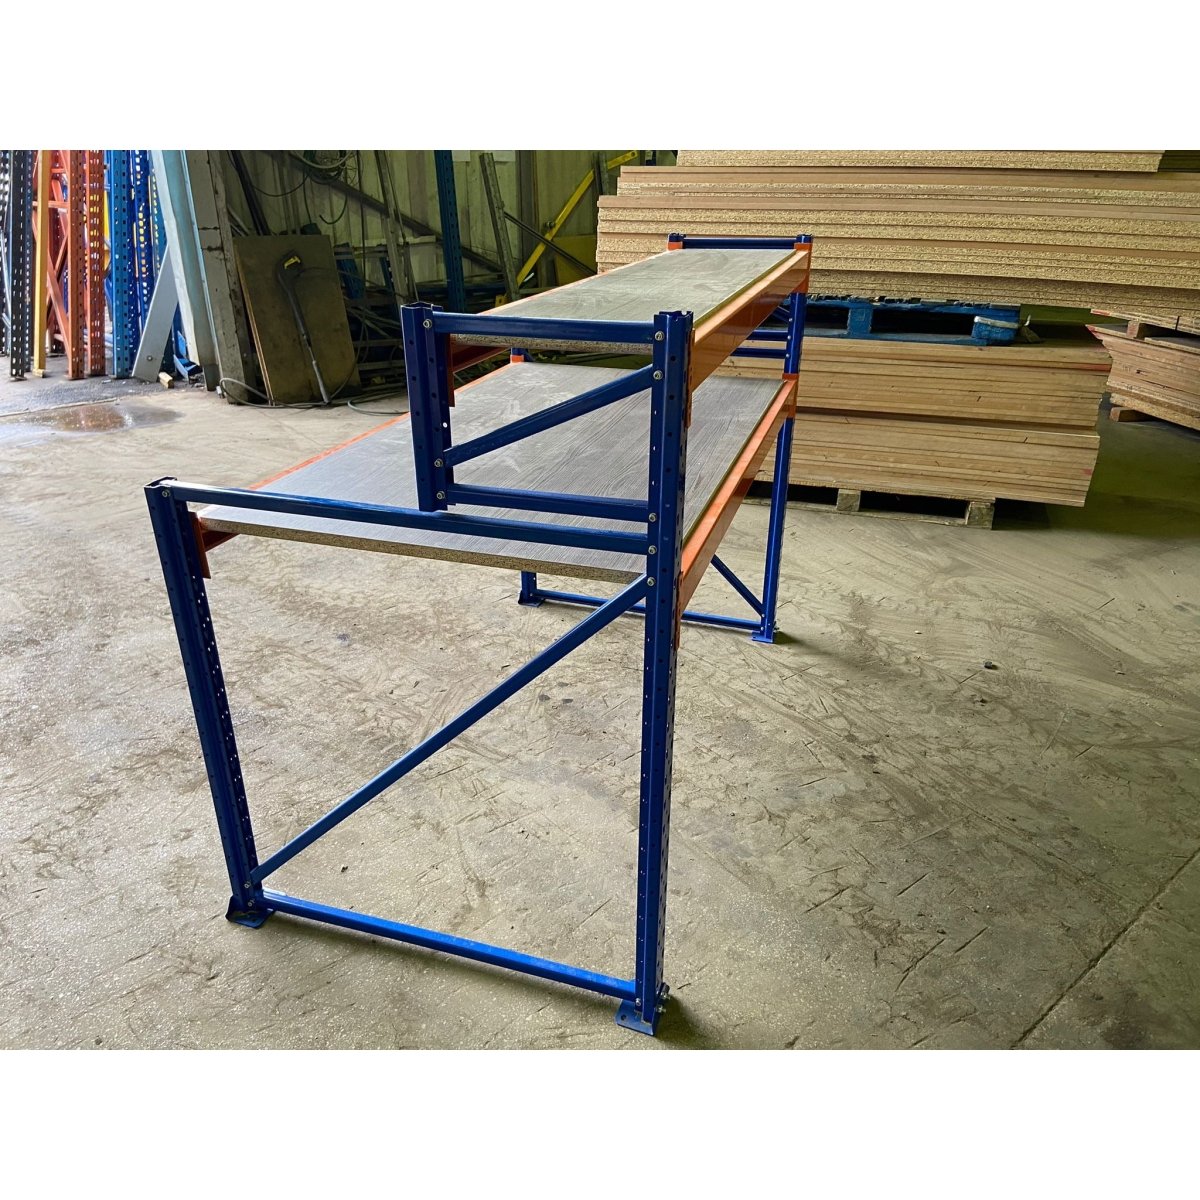 WSP's 2 Tier Heavy Duty Workstation With Chipboard Shelves - Warehouse Storage Products